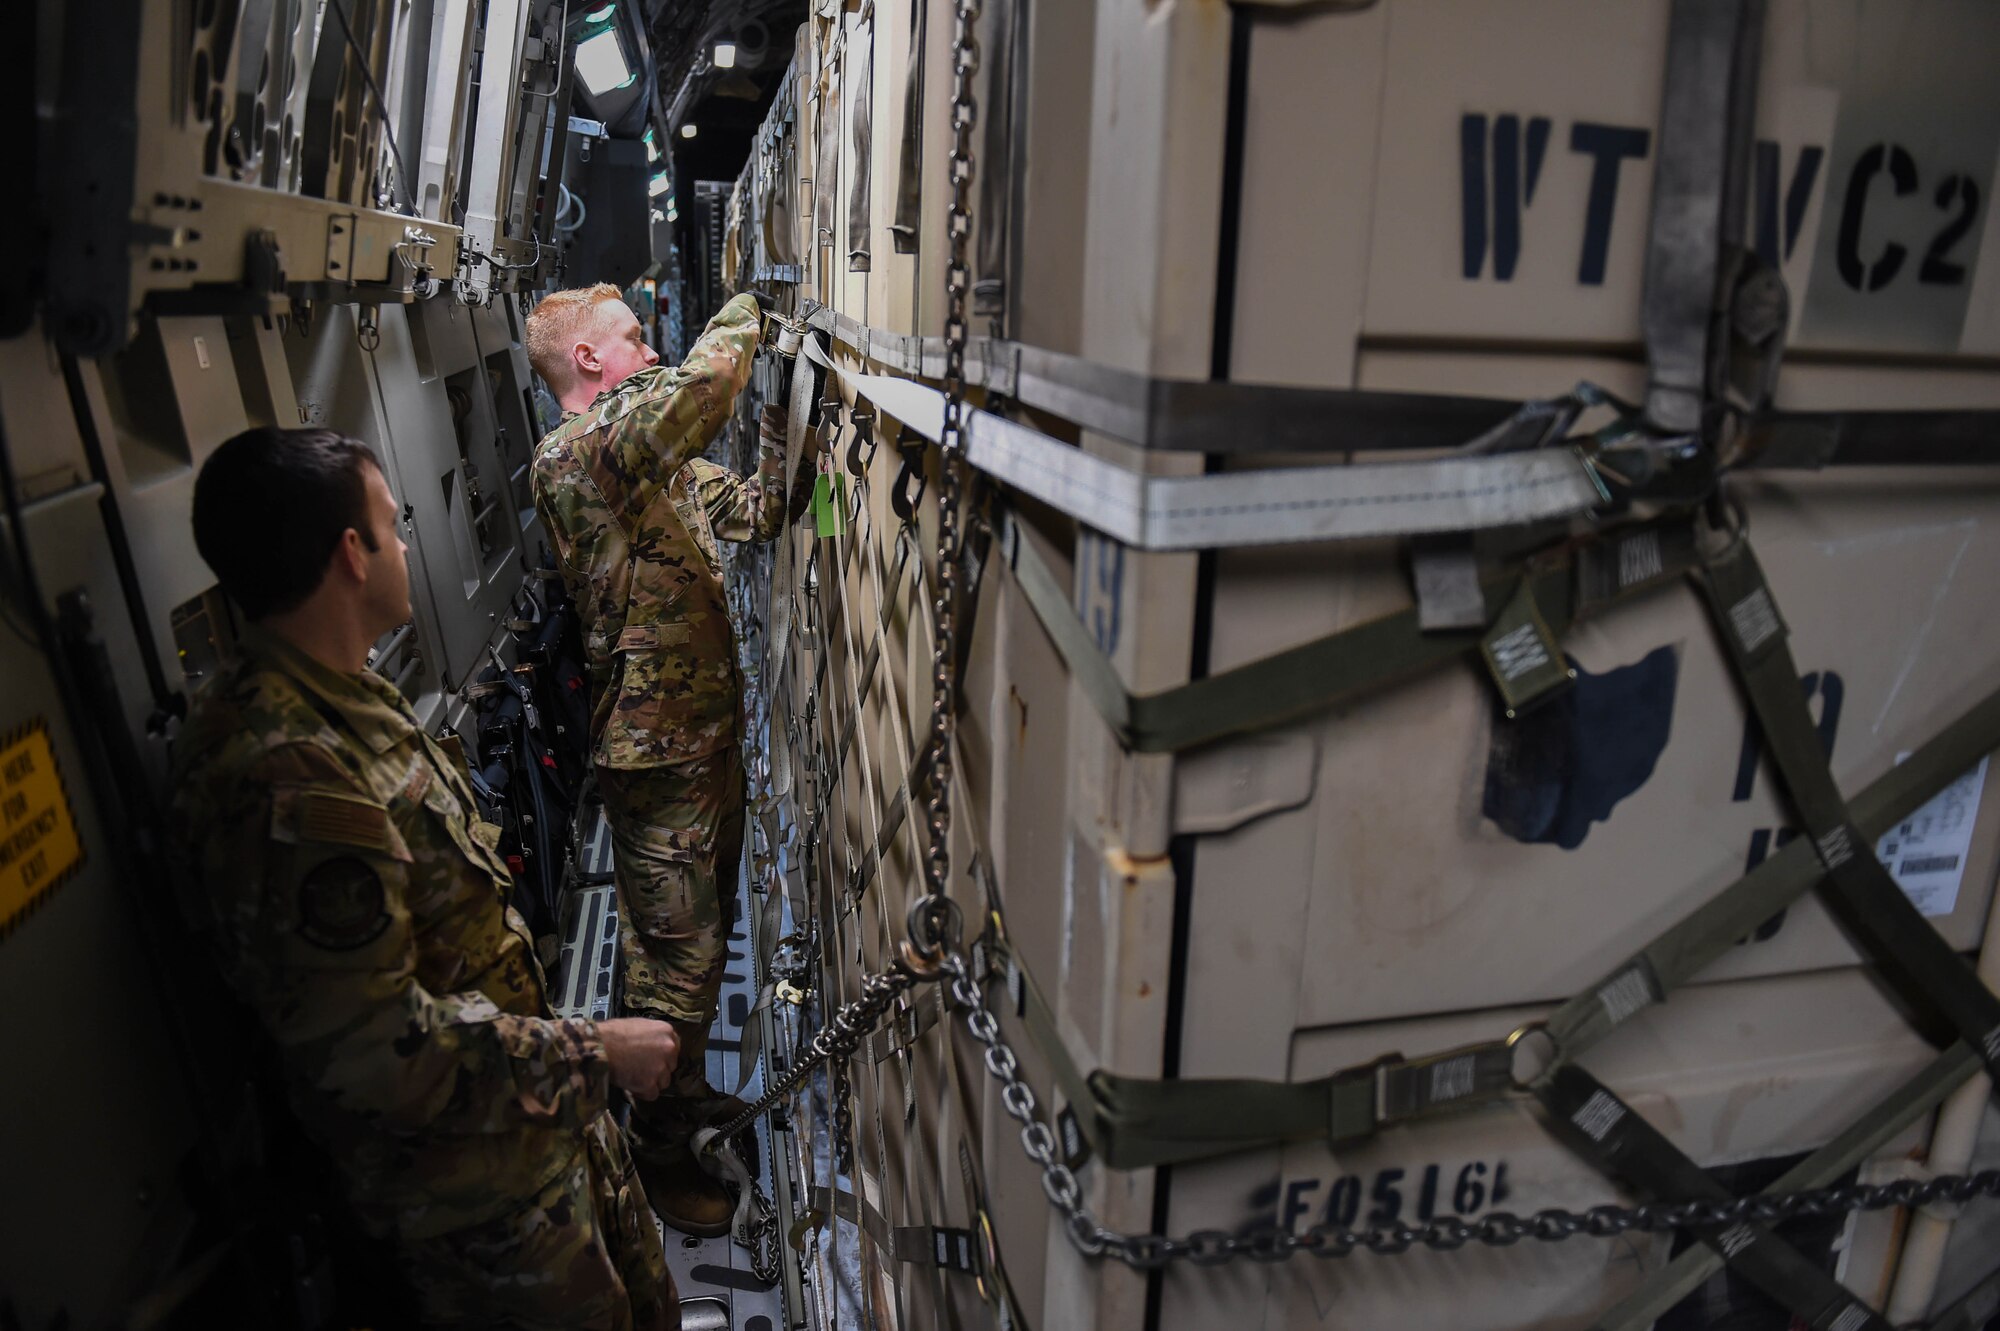 Master Sgt. Andrew Reilly, 4th Airlift Squadron loadmaster, observes Airman 1st Class Kam Watt, 4th Airlift Squadron loadmaster, attach and tighten an additional strap onto a piece of cargo aboard a C-17 Globemaster III before taking off from Spangdahlem Air Base, Germany, Dec. 18, 2019. The metal piece at the end of an existing strap had started to deteriorate, so as an added security measure the loadmasters attached one of their straps. (U.S. Air Force photo by Airman 1st Class Mikayla Heineck)